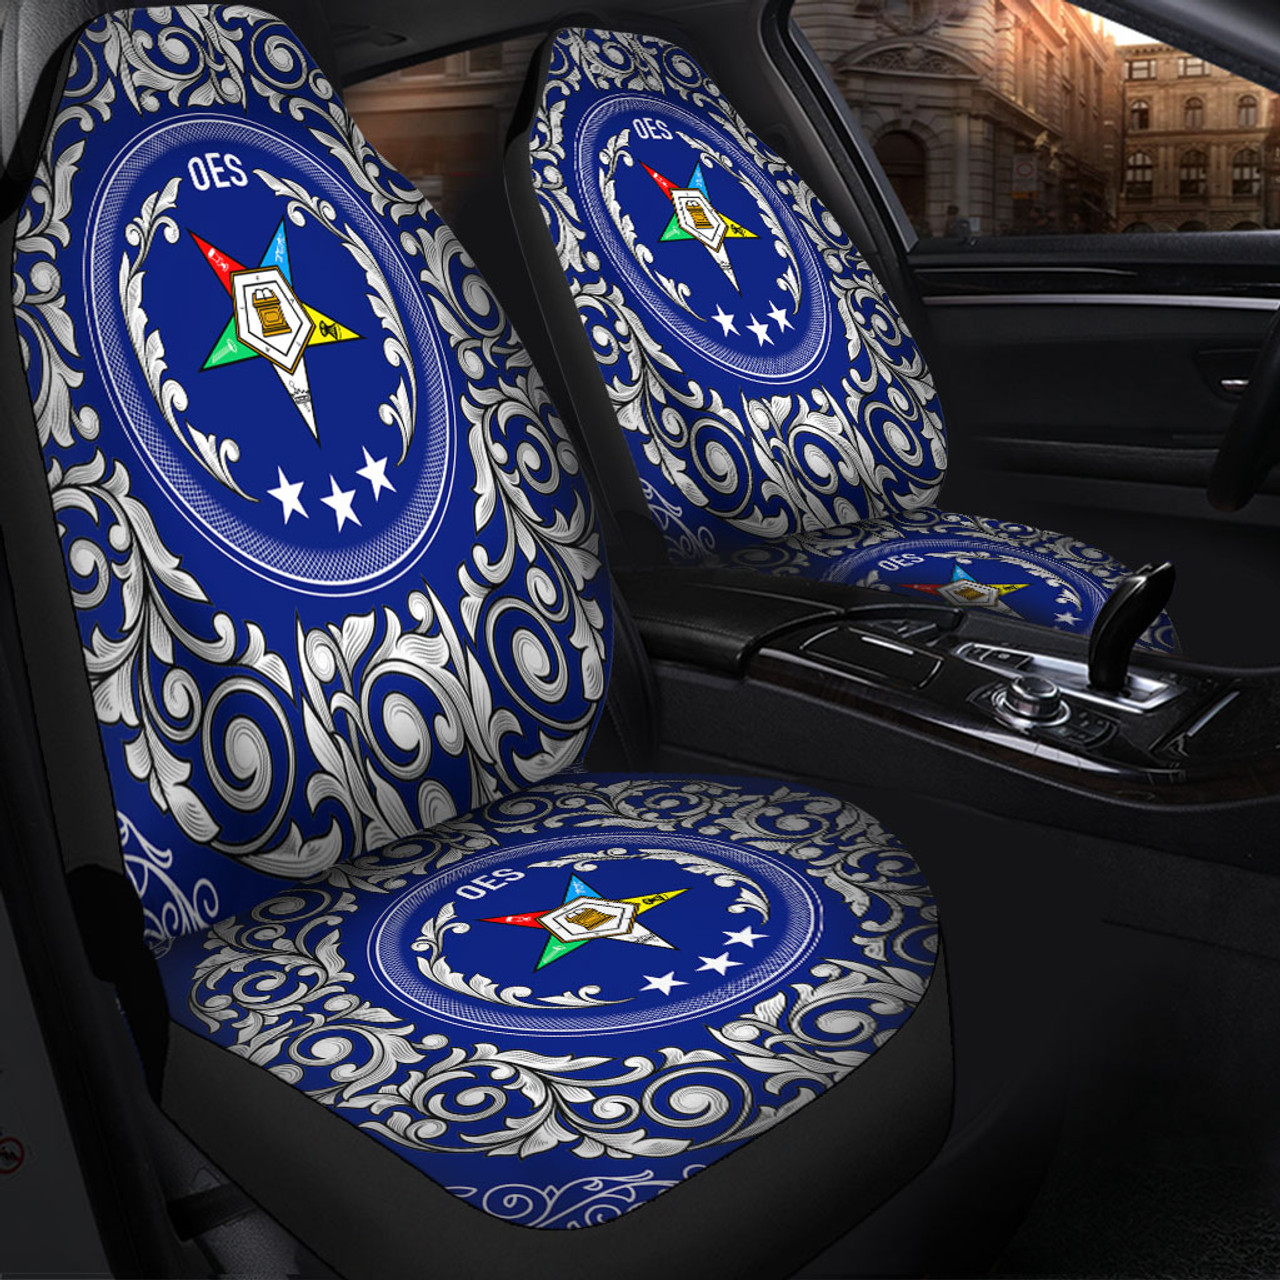 Order of the Eastern Star Car Seat Covers Sorority